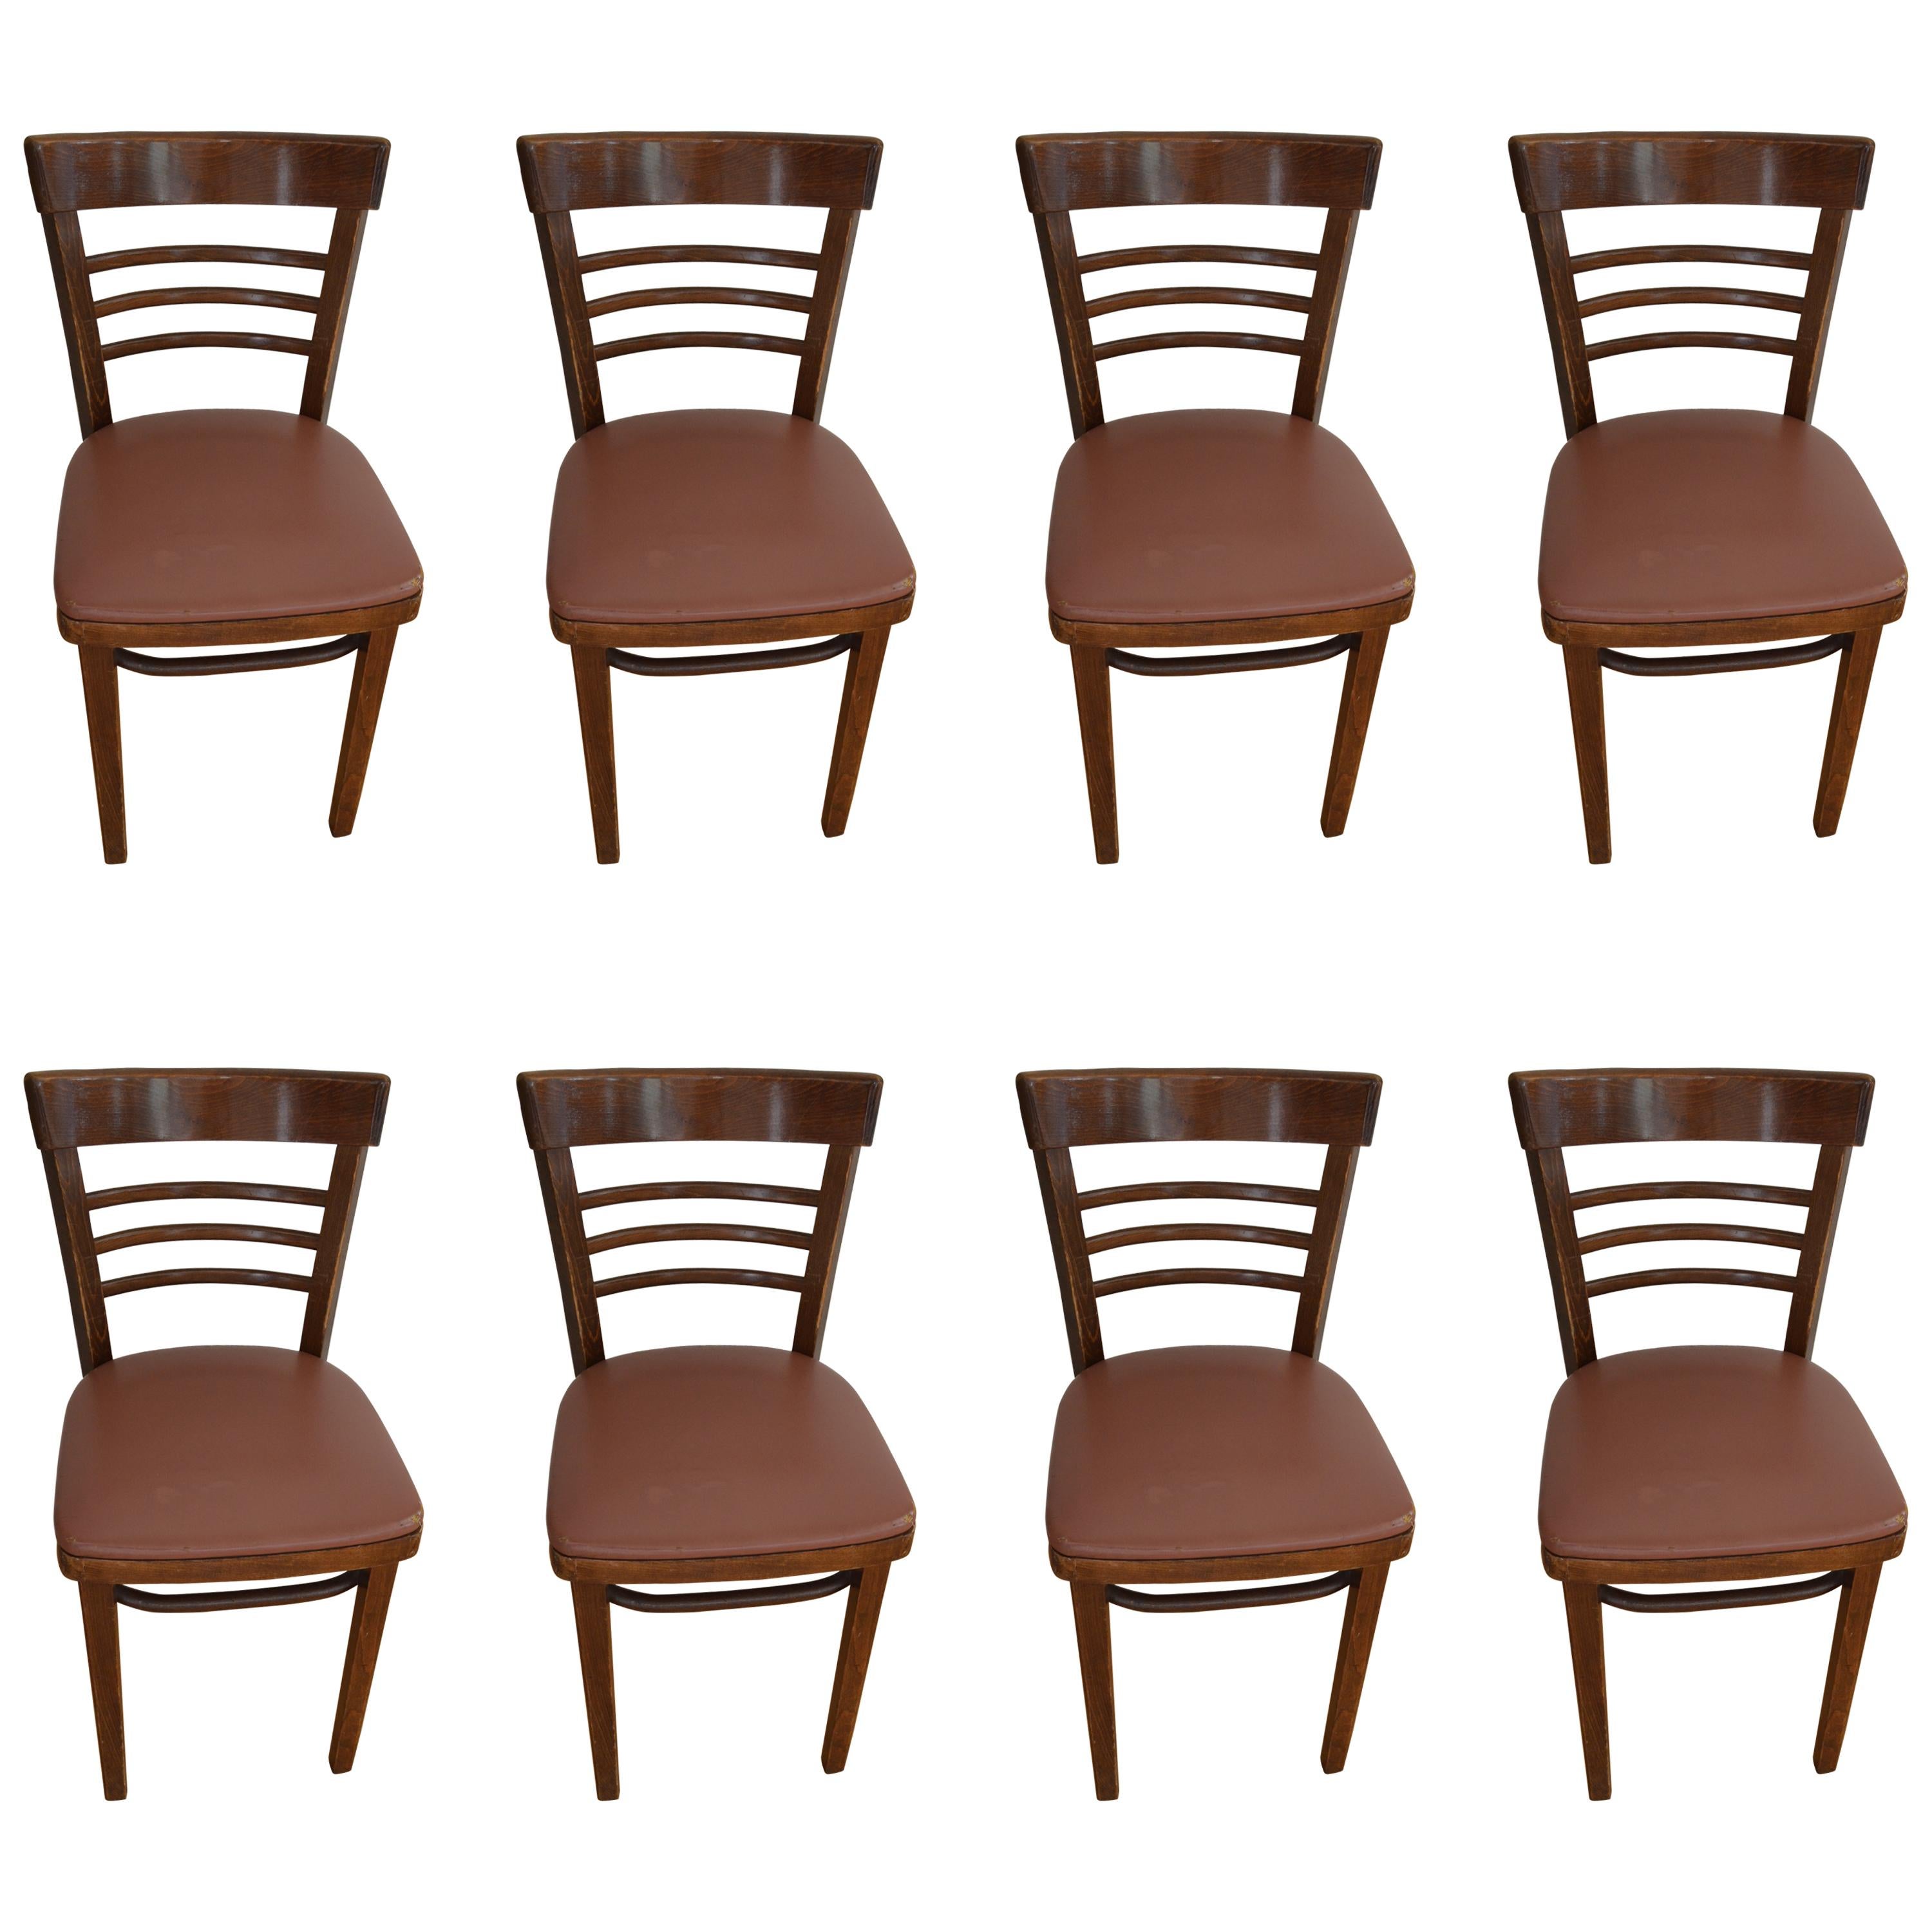 Thonet Cafe Bistro Restaurant Chairs, Set of Eight (NOTE: 22 chairs available)